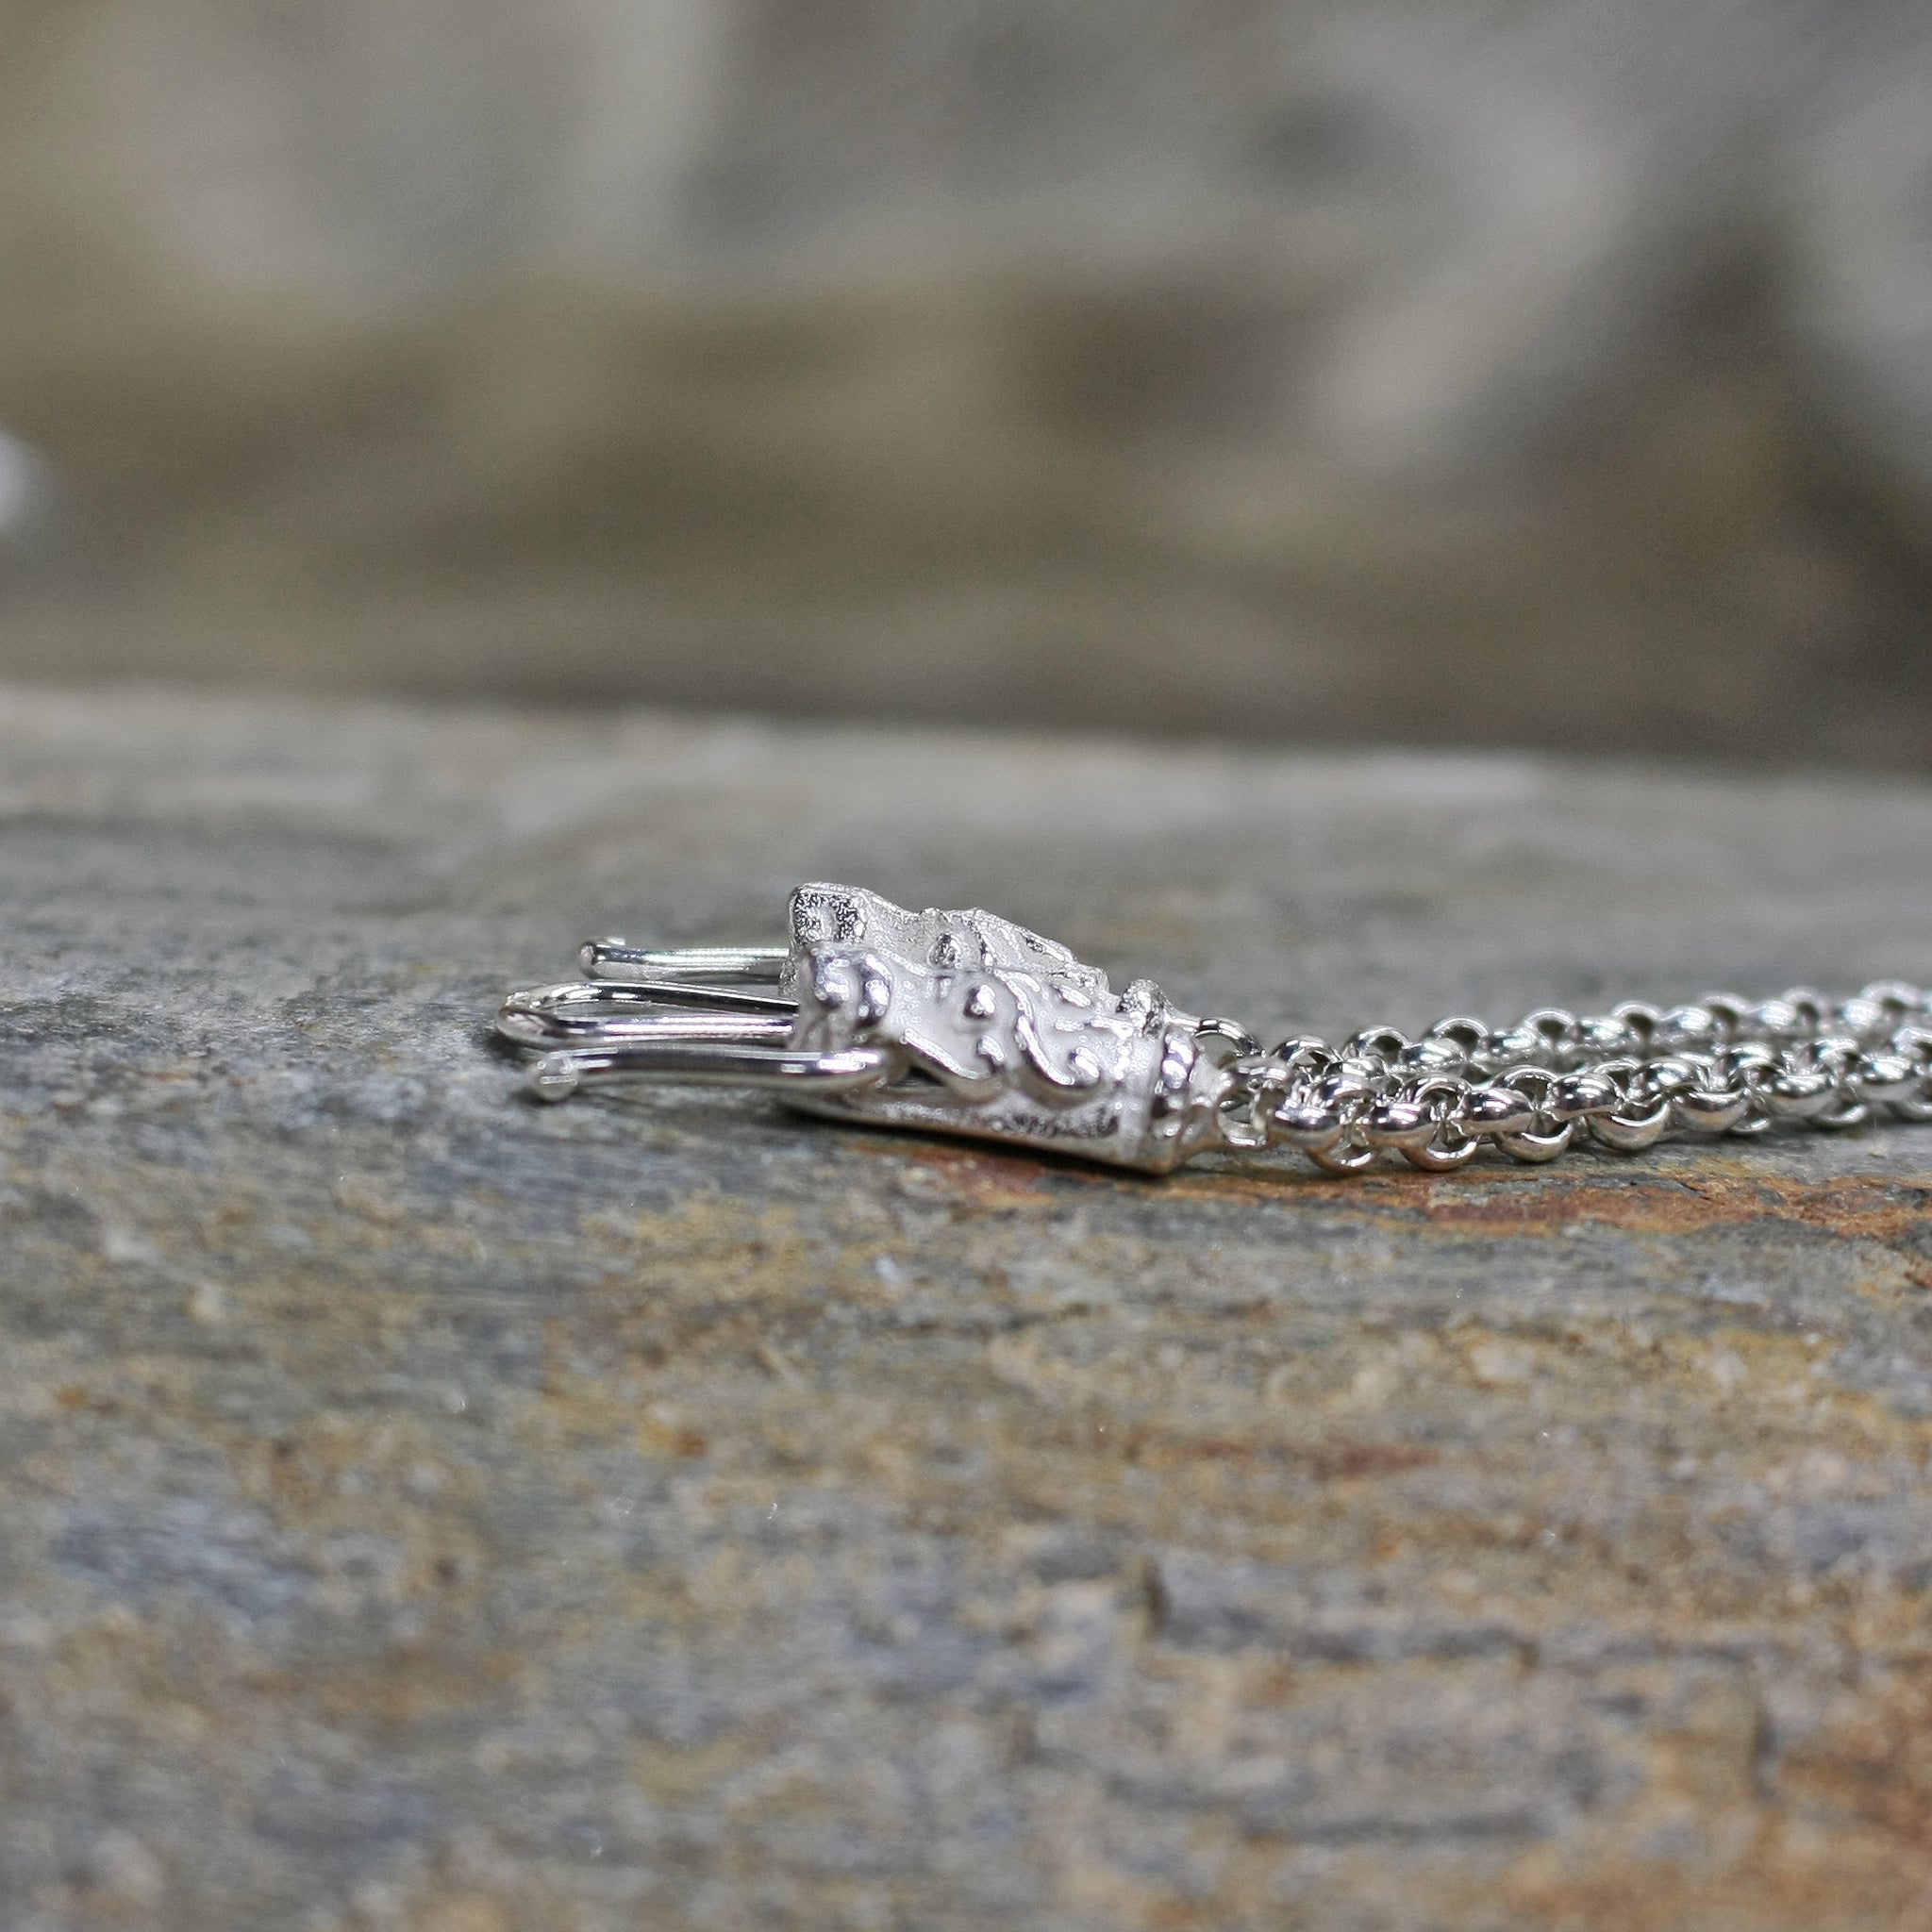 Sterling Silver Viking Necklace with Gotlandic Dragon Heads and Anchor Chain on Rock with Butterfly Clasp